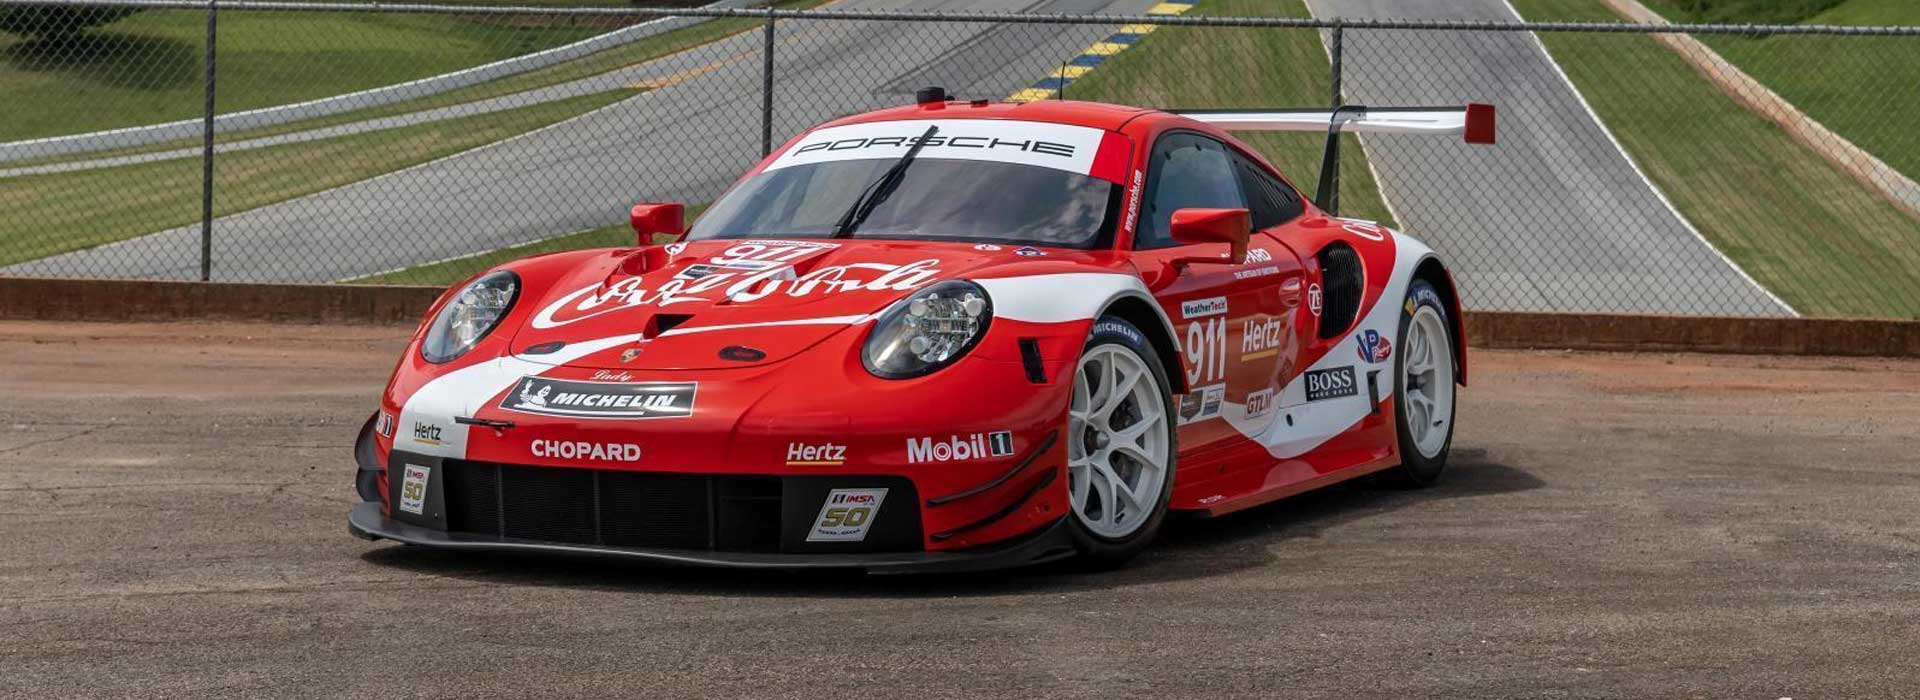 Coca-Cola, Porsche Join Forces for Iconic Livery on Weathertech Championship GLTM-leading 911 RSR Race Cars for 2019